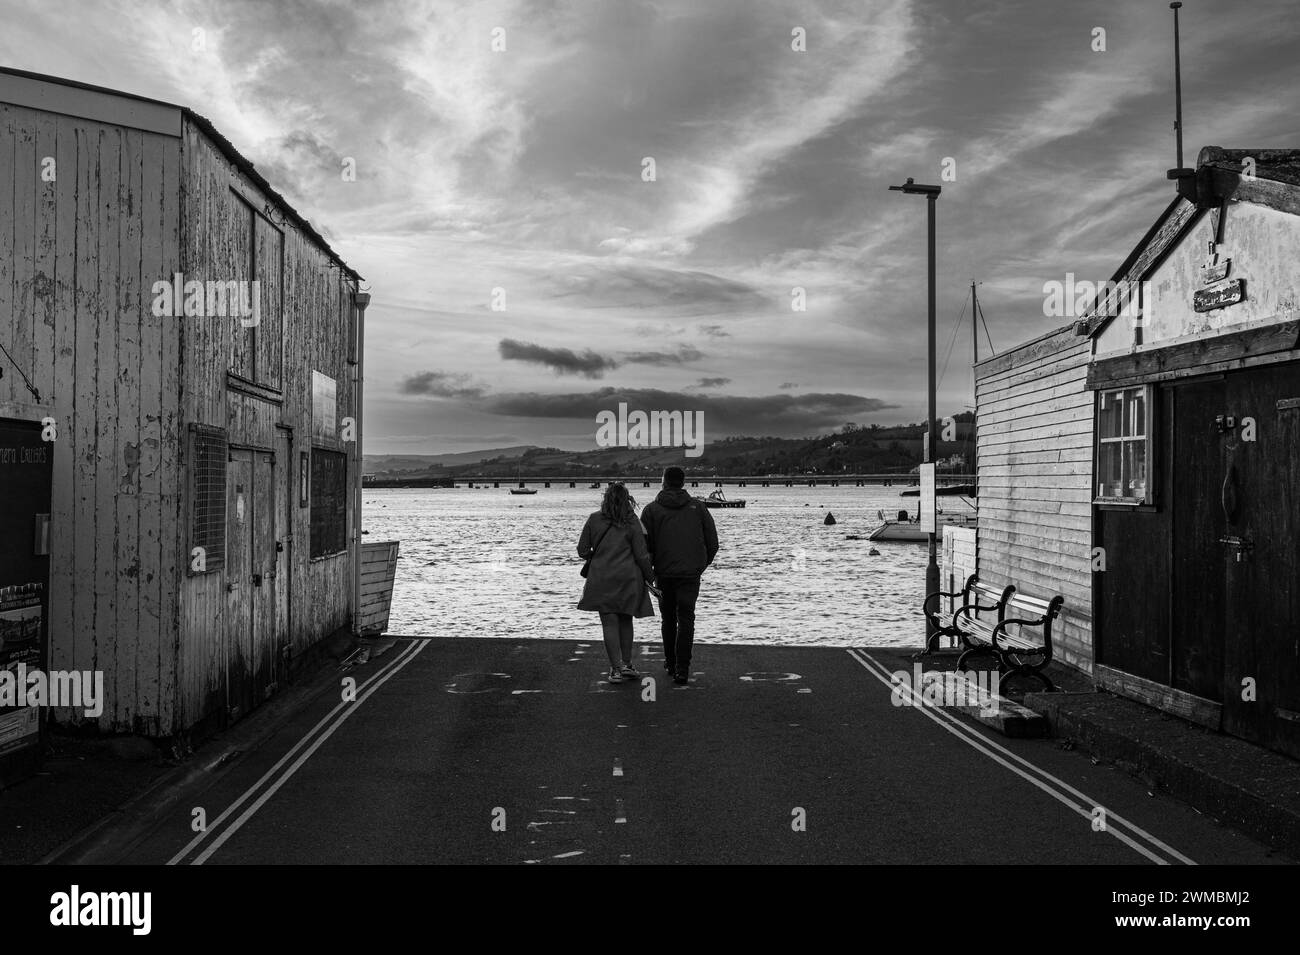 Young couple walking towards the river Teign at sunset. Dramatic sky with the River Teign and Shaldon bridge in the distance. Black & white photo. Stock Photo